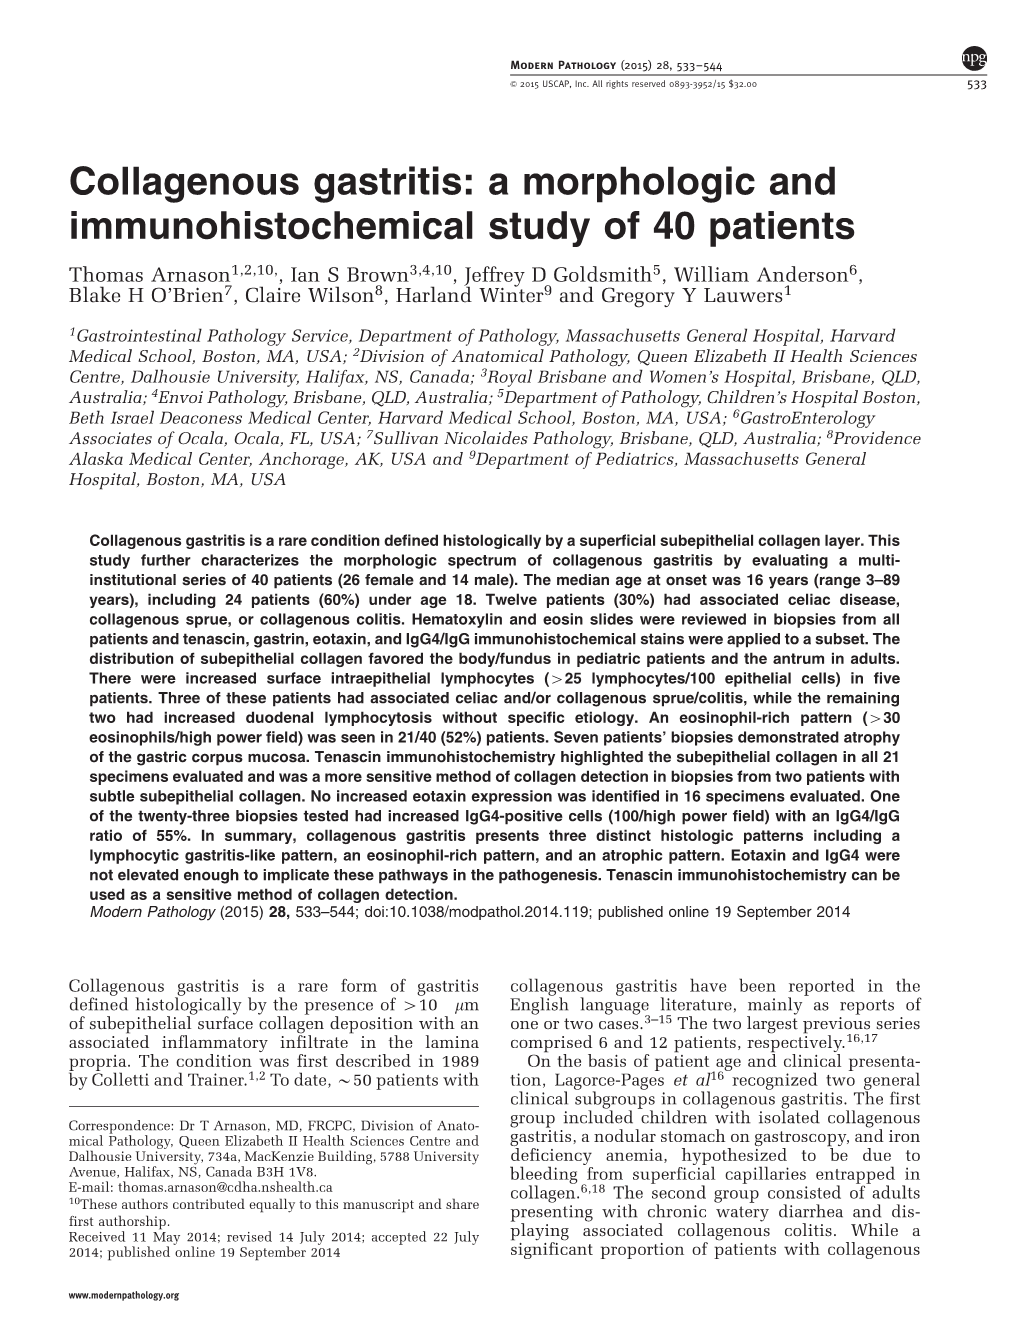 Collagenous Gastritis: a Morphologic and Immunohistochemical Study of 40 Patients